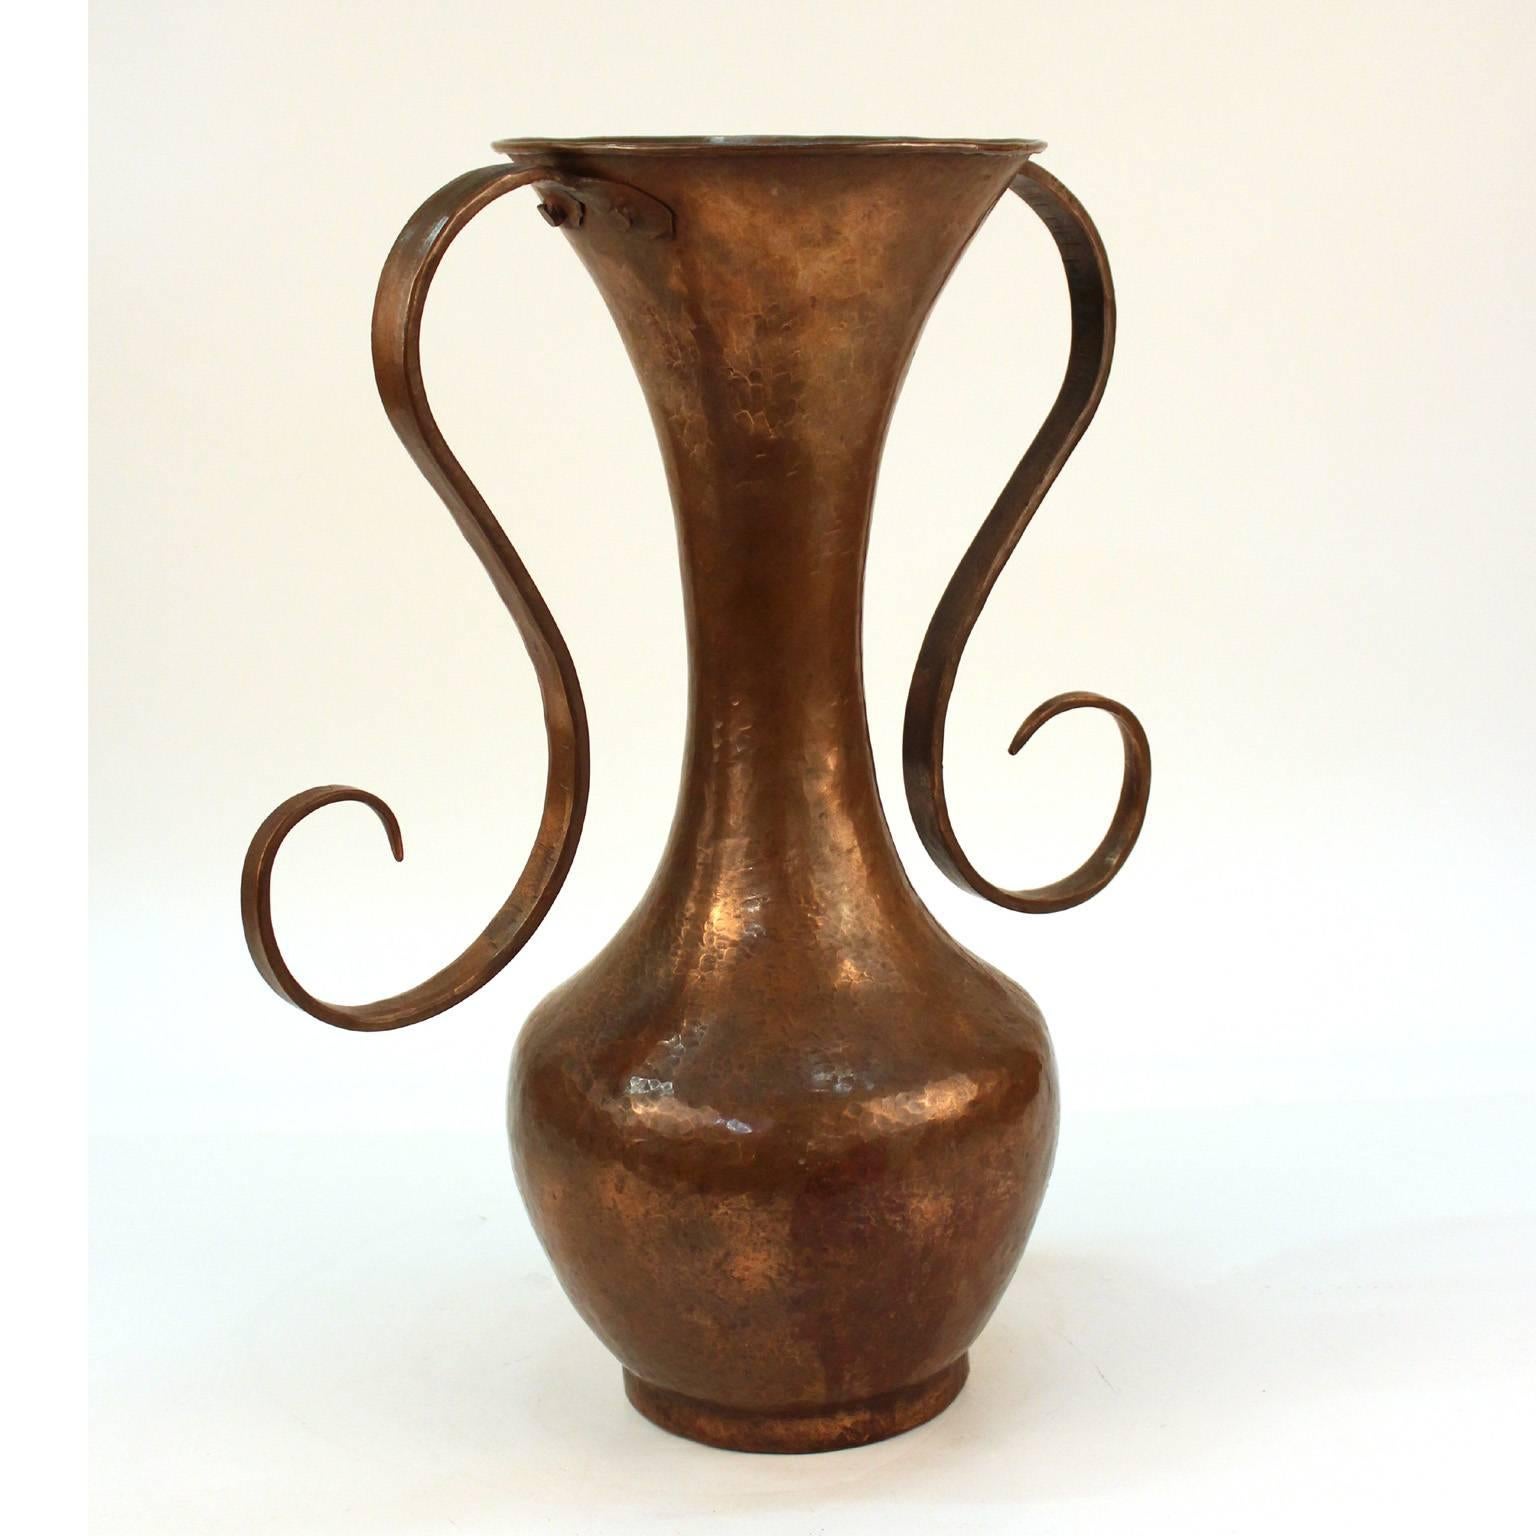 An Italian modernist hand-hammered copper vase with swirling handles, made during the 1920s. Good original patina; unsigned.